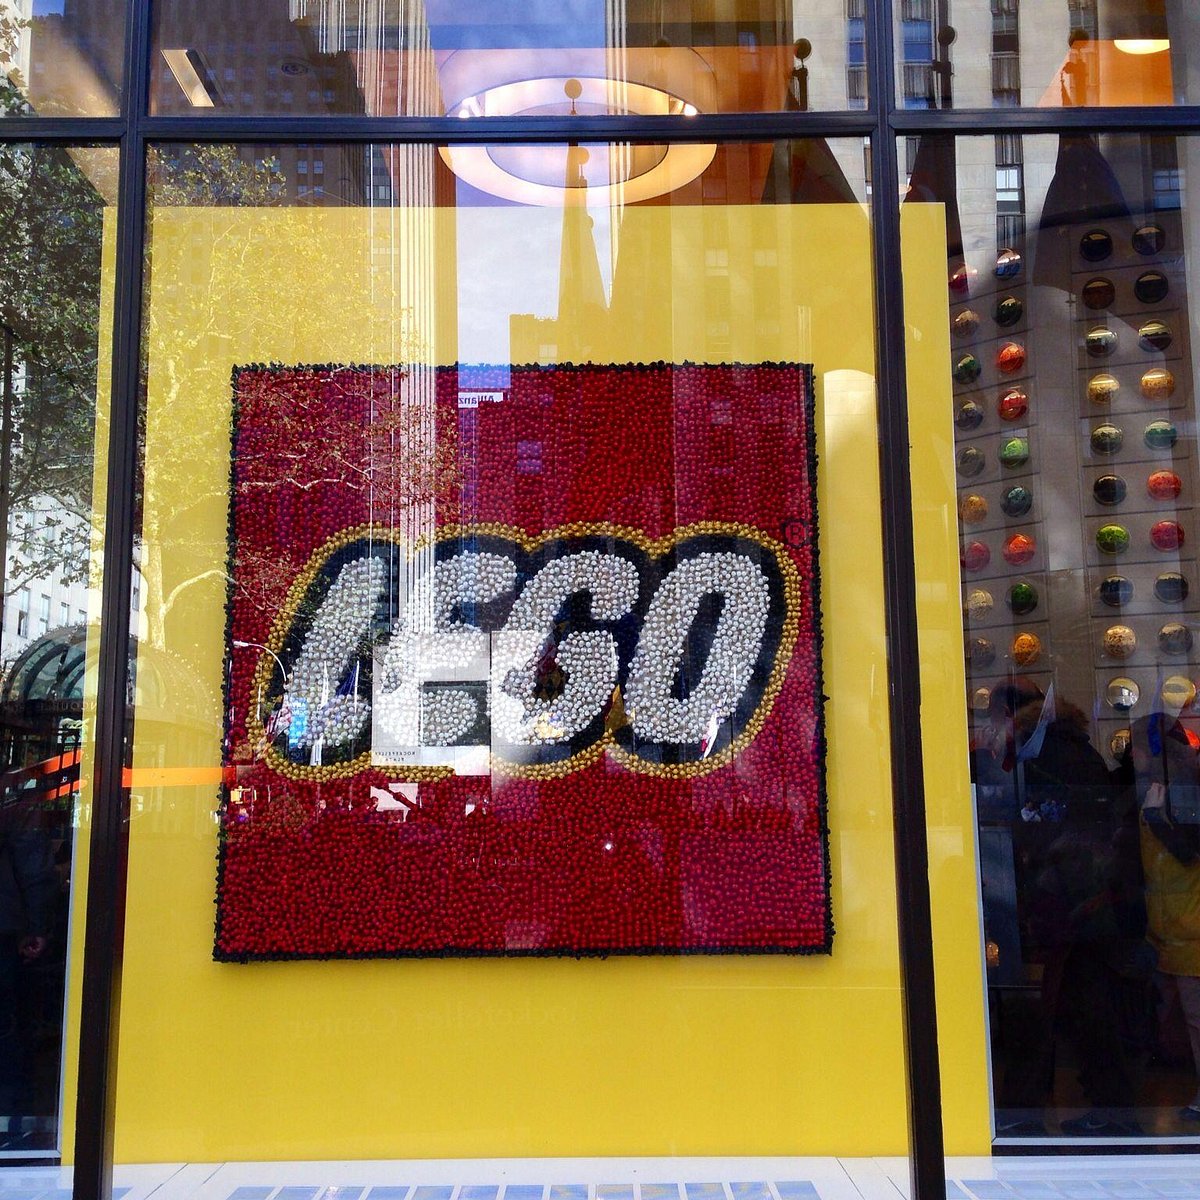 The LEGO Store (New York City) - All You Need to Know You